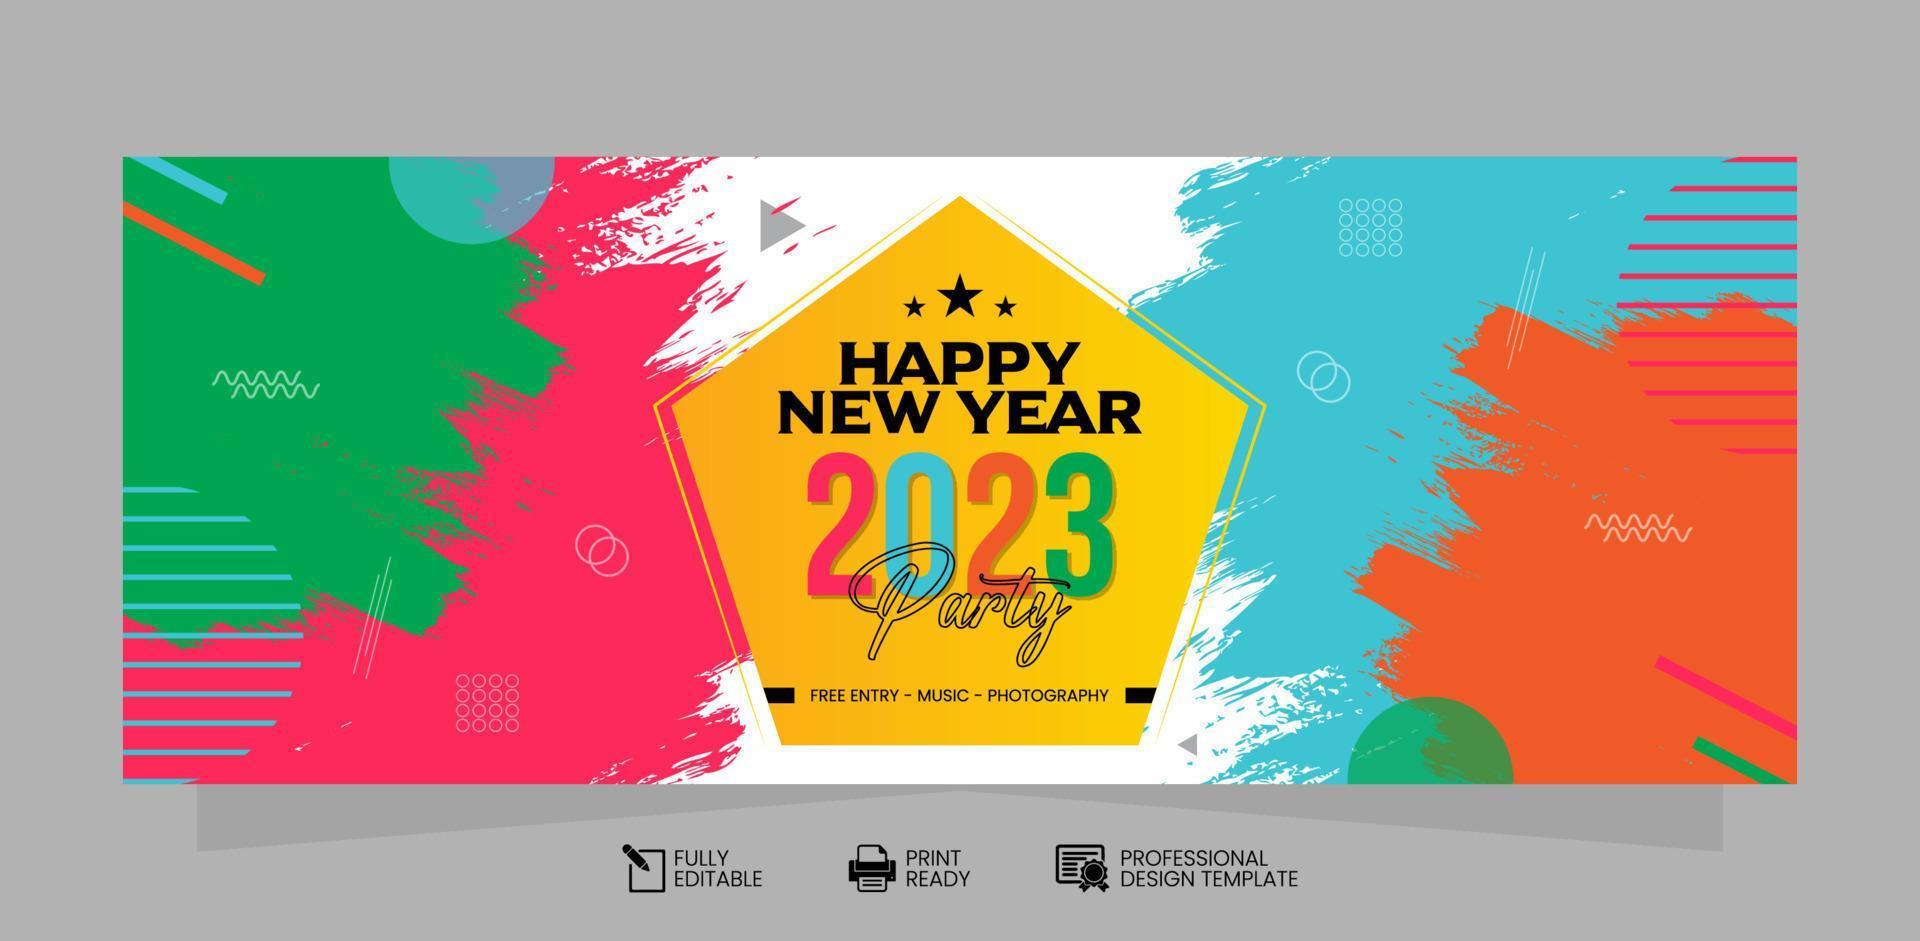 Happy New Year 2023 Background Design Template vector